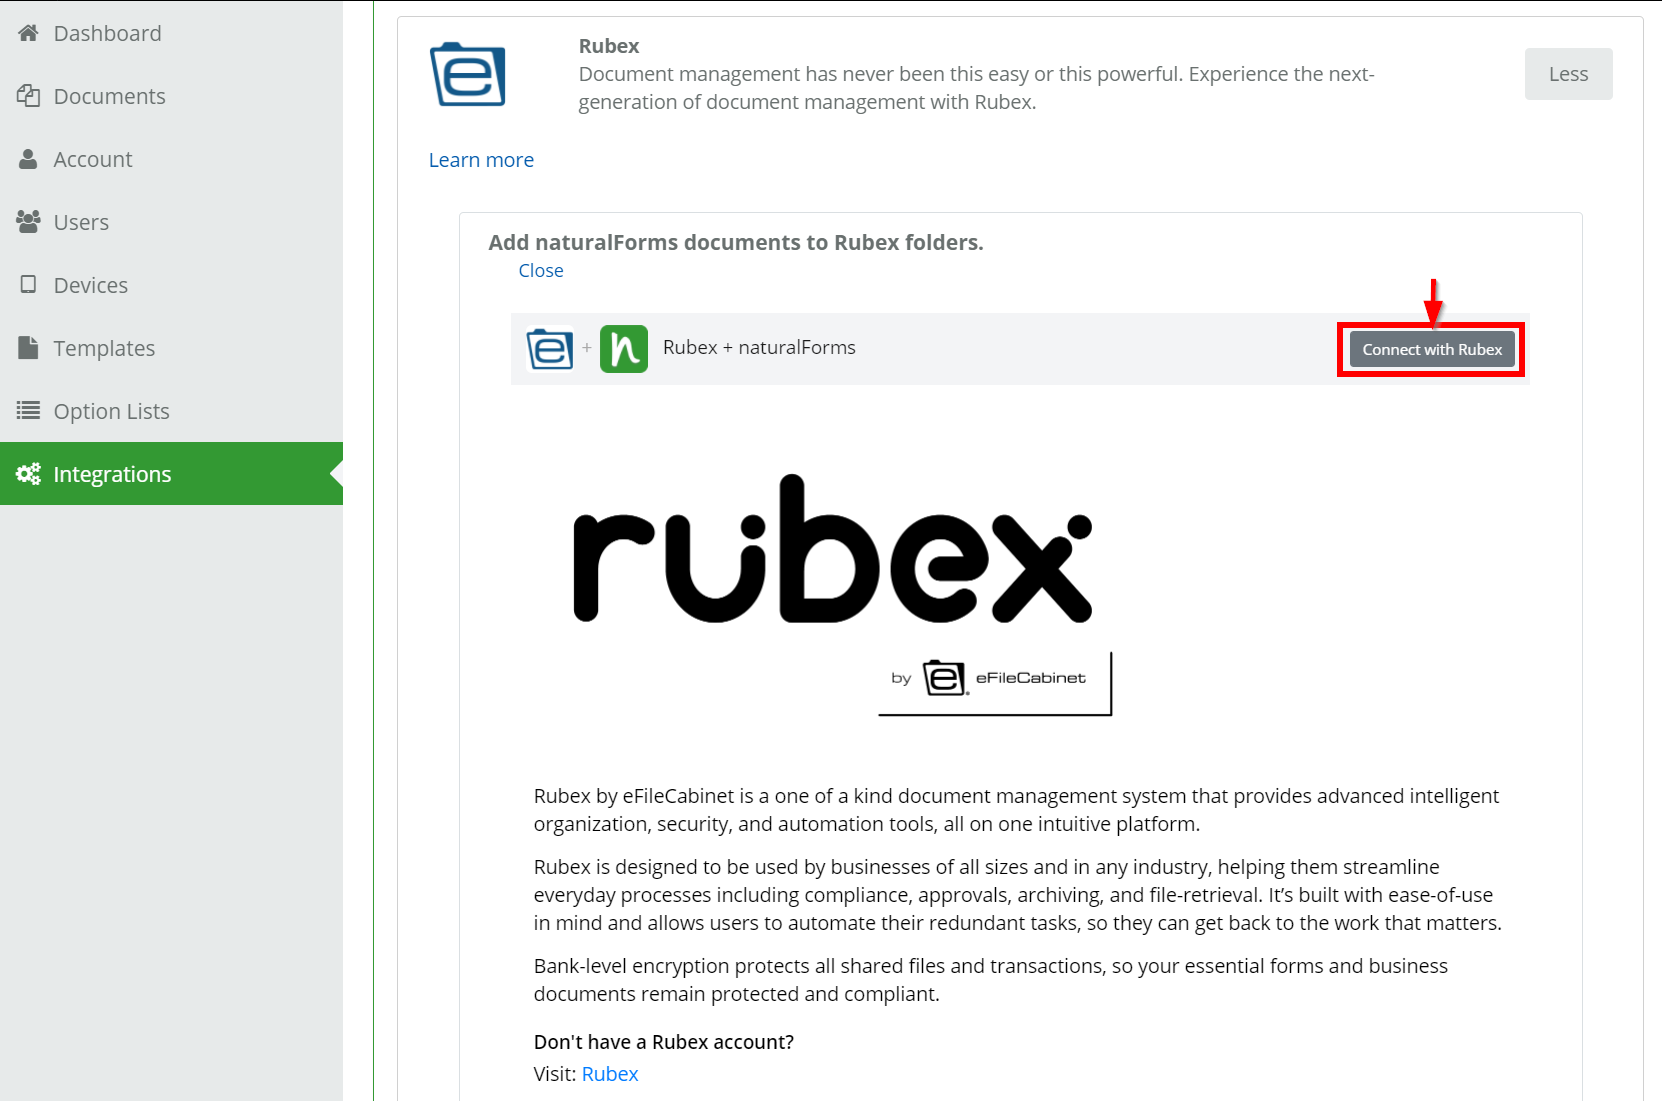 accountPortal.Integrations.Rubex.Connect.png